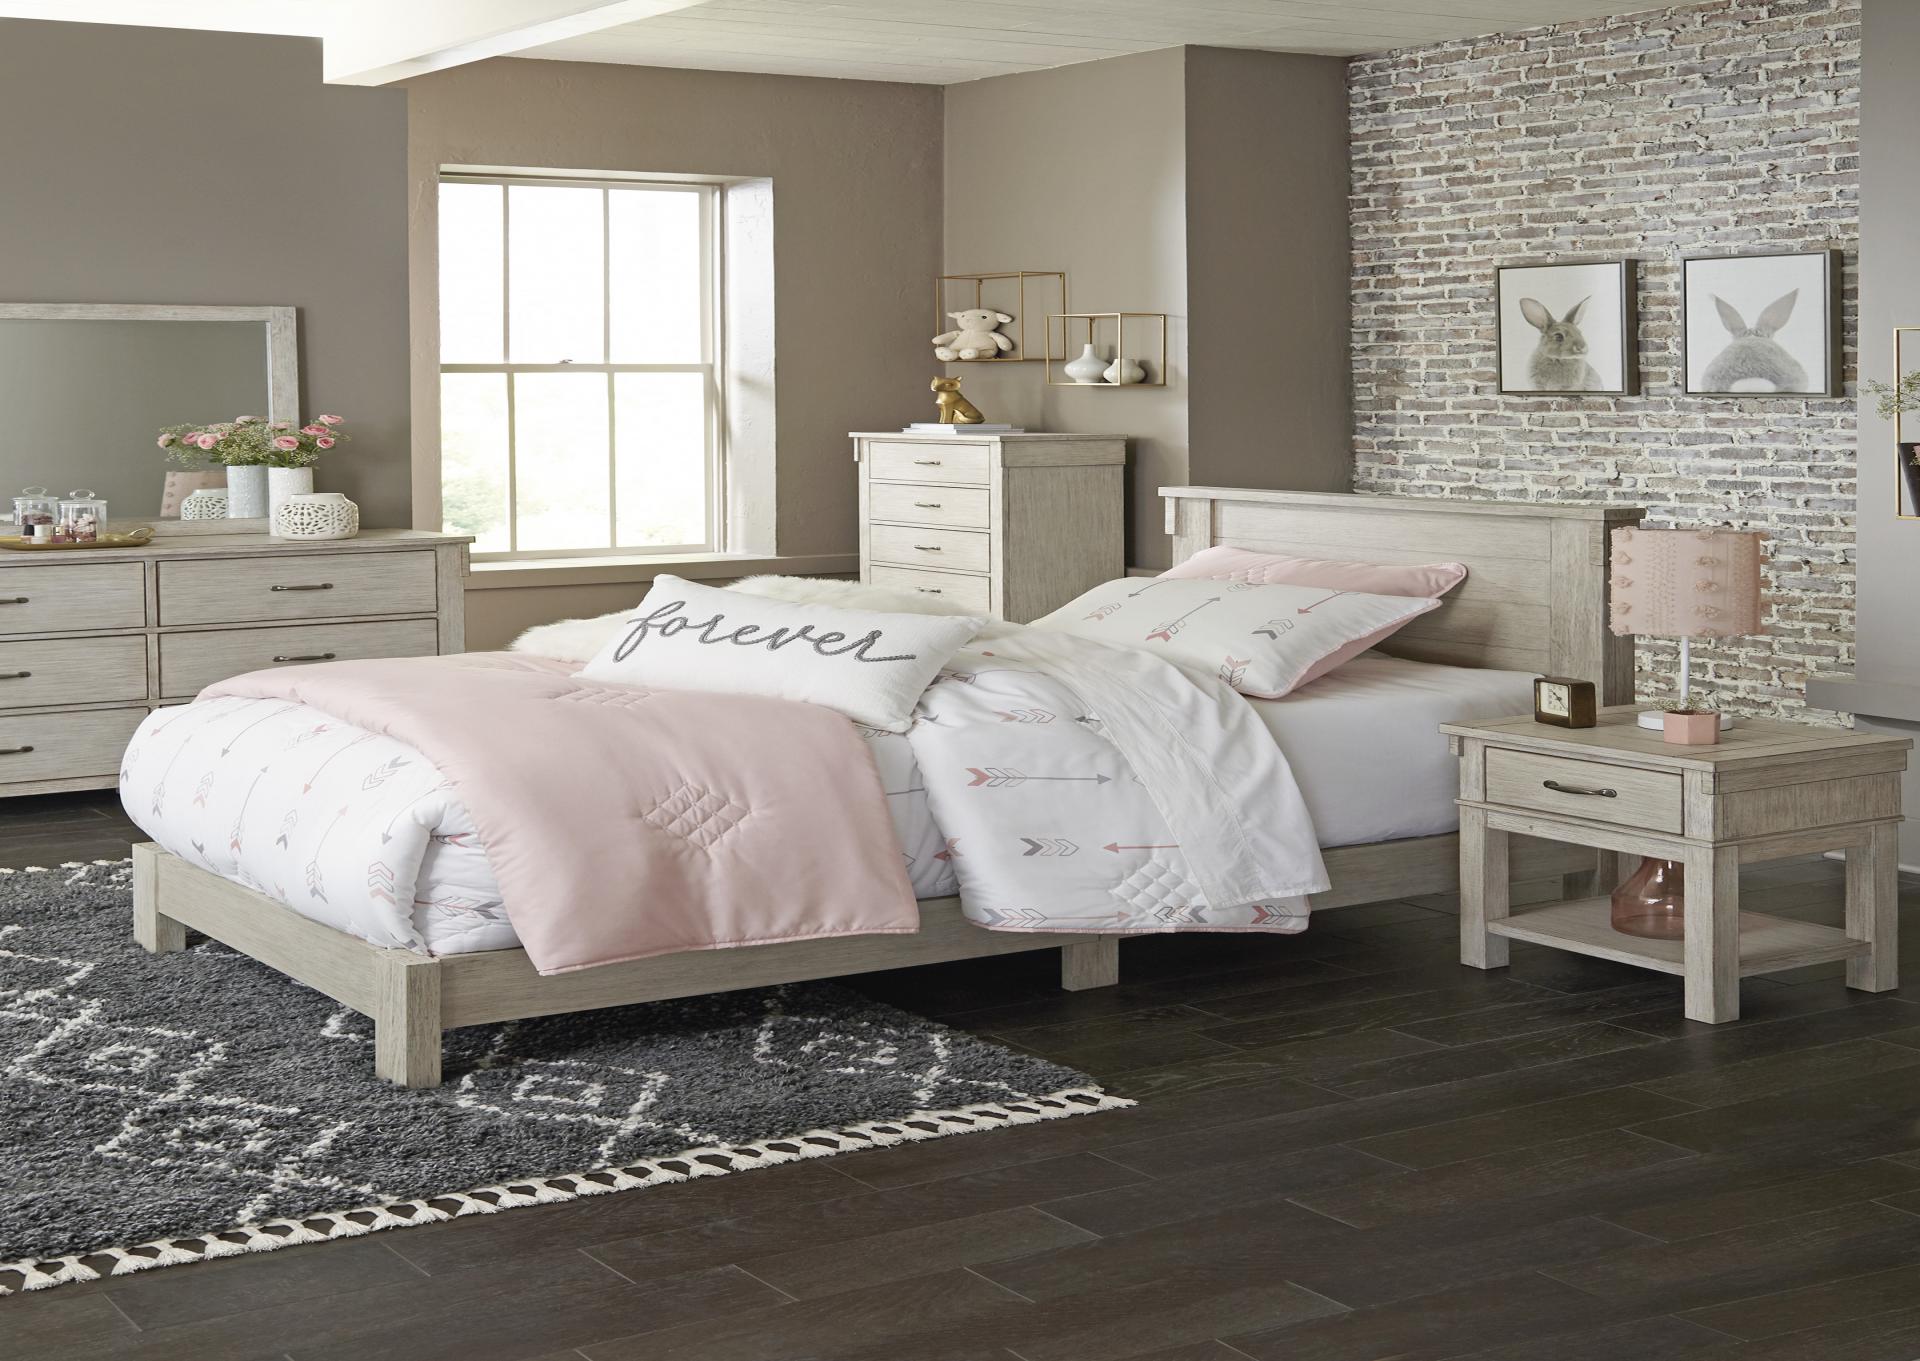 Hollentown Twin Bed, Dresser, and Night Stand,In Store